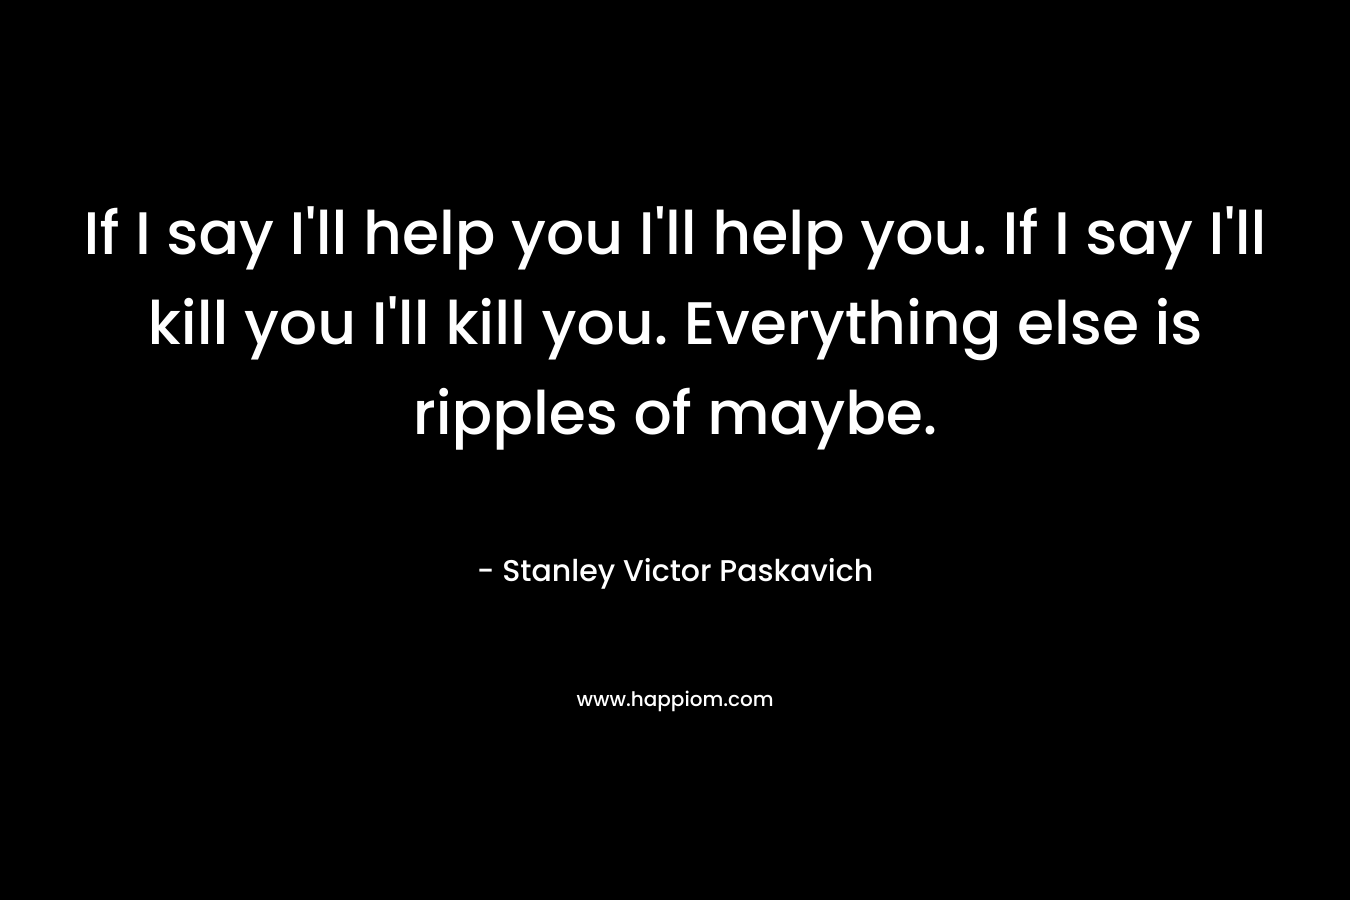 If I say I'll help you I'll help you. If I say I'll kill you I'll kill you. Everything else is ripples of maybe.